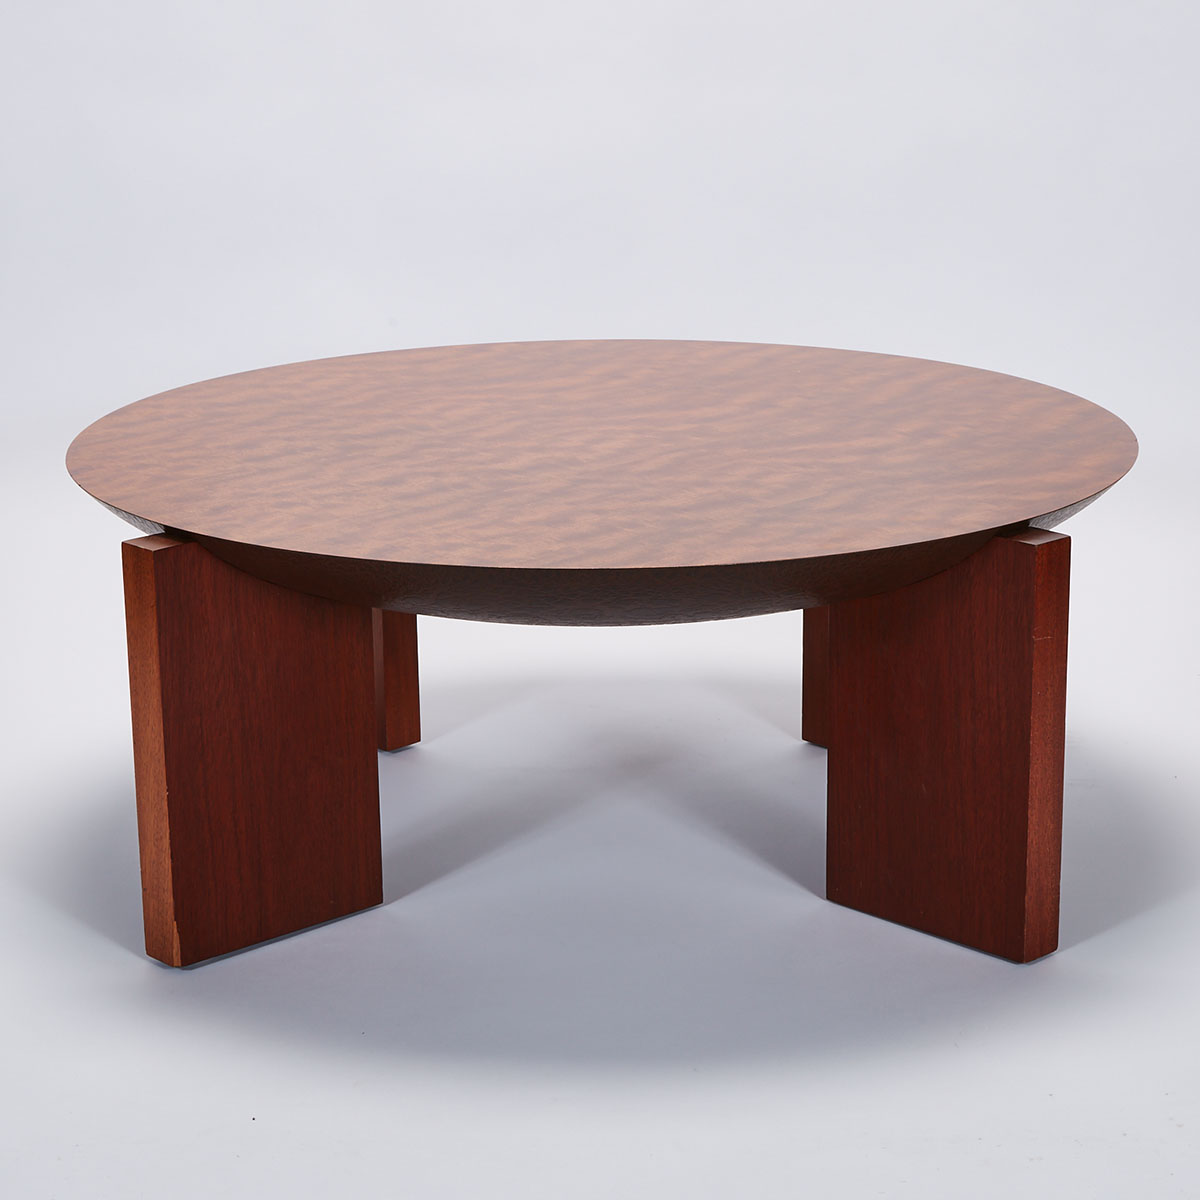 Wendell Castle ‘Olympia’ Coffee Table, c.1970